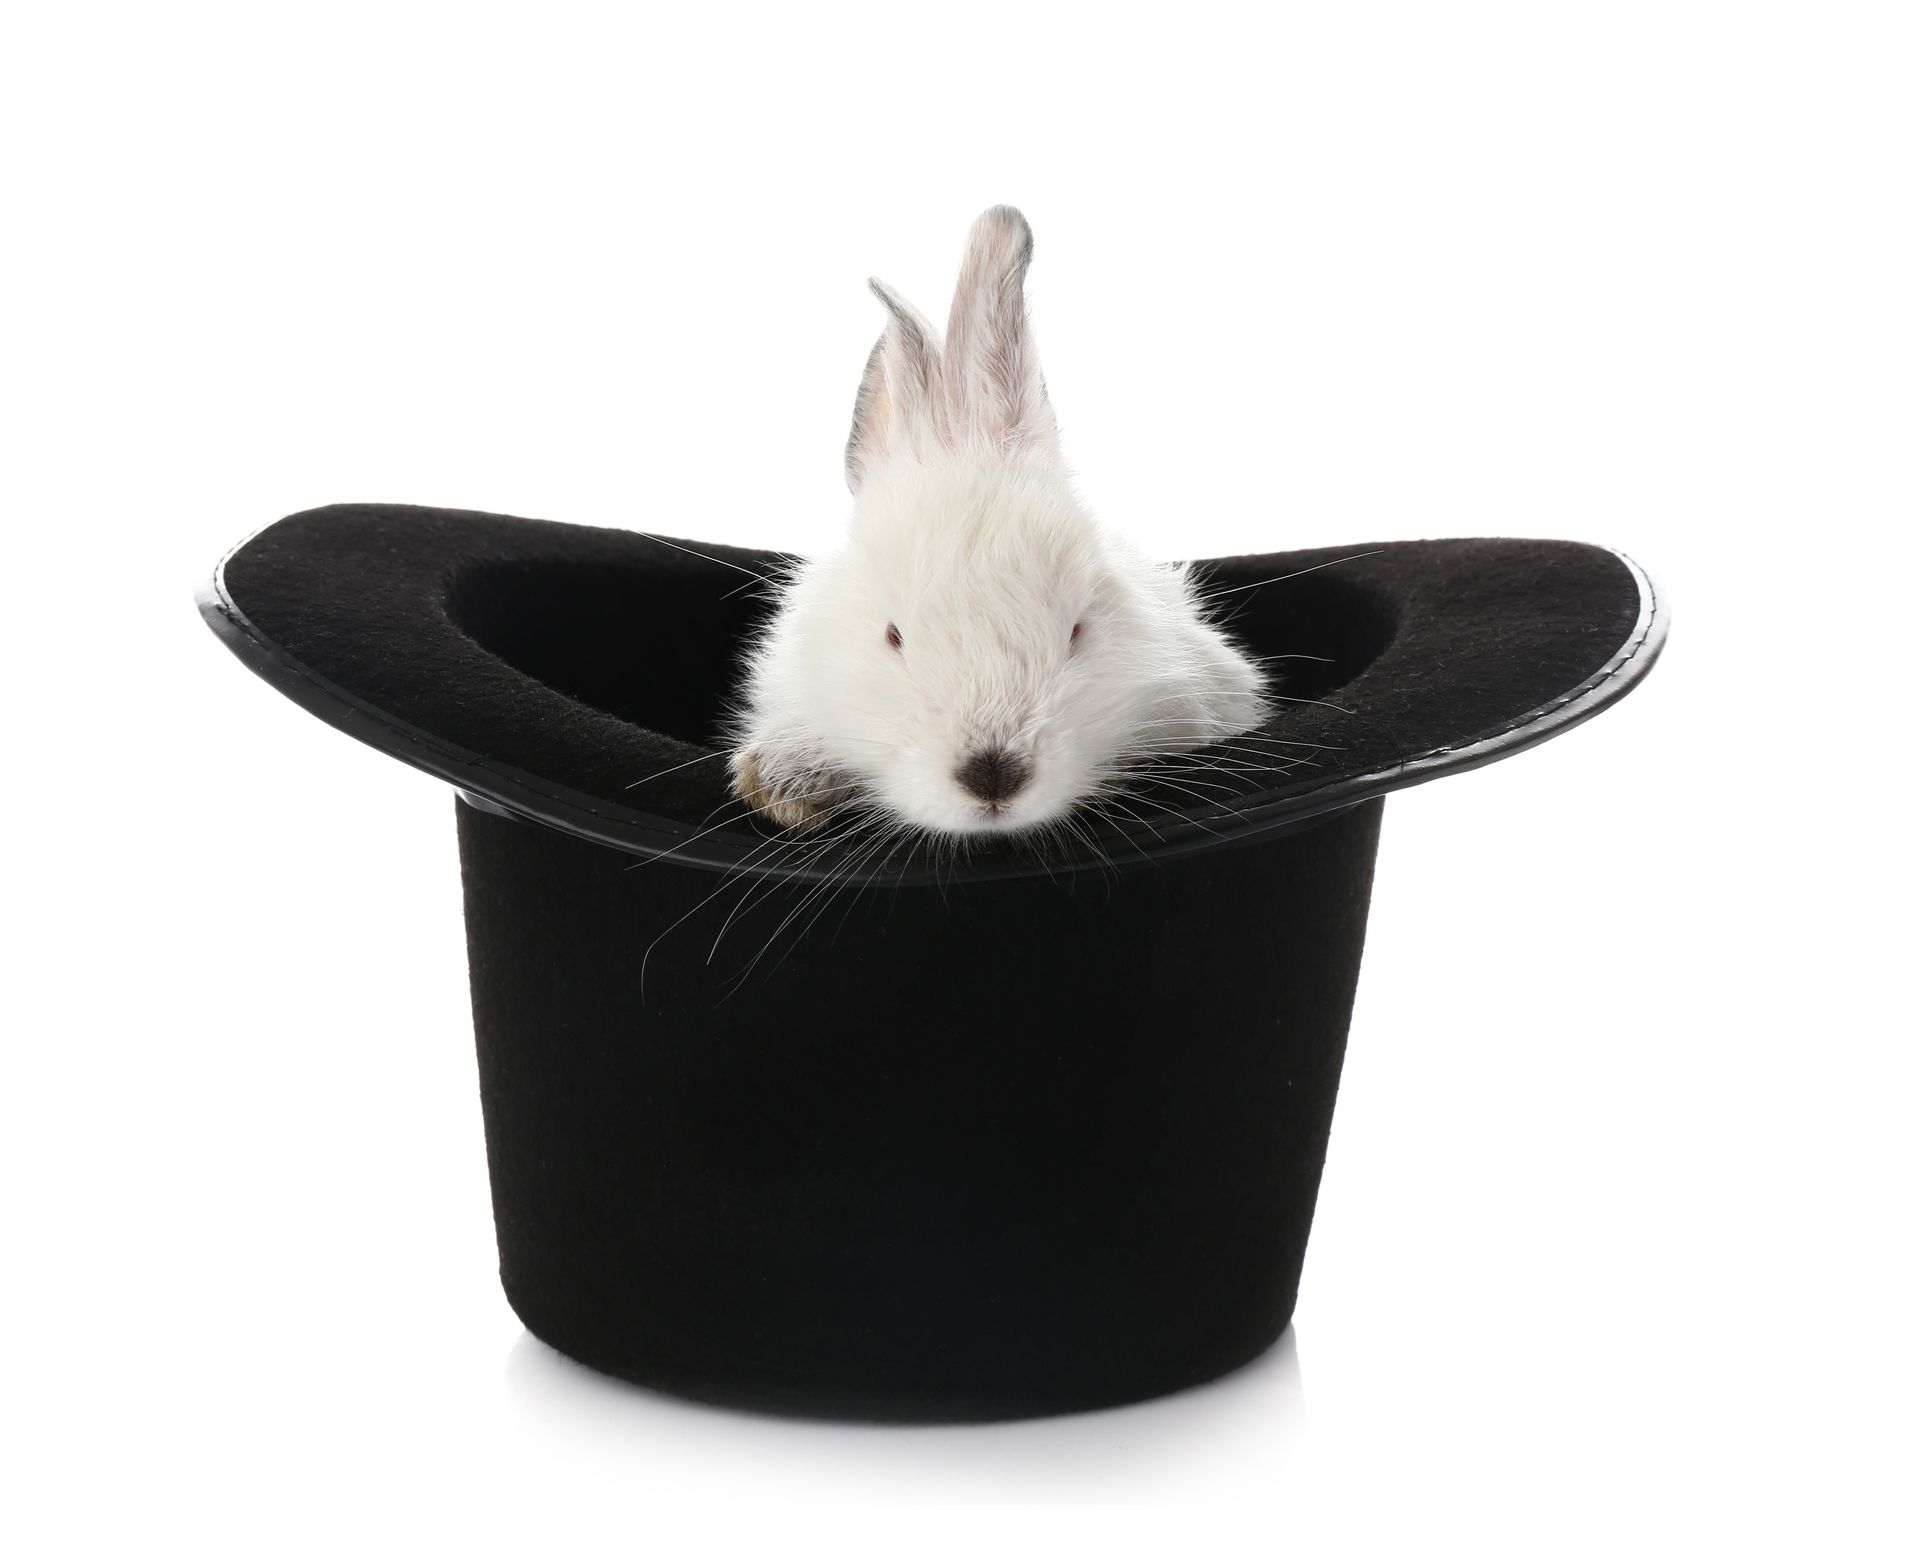 A white rabbit is sitting in a black top hat